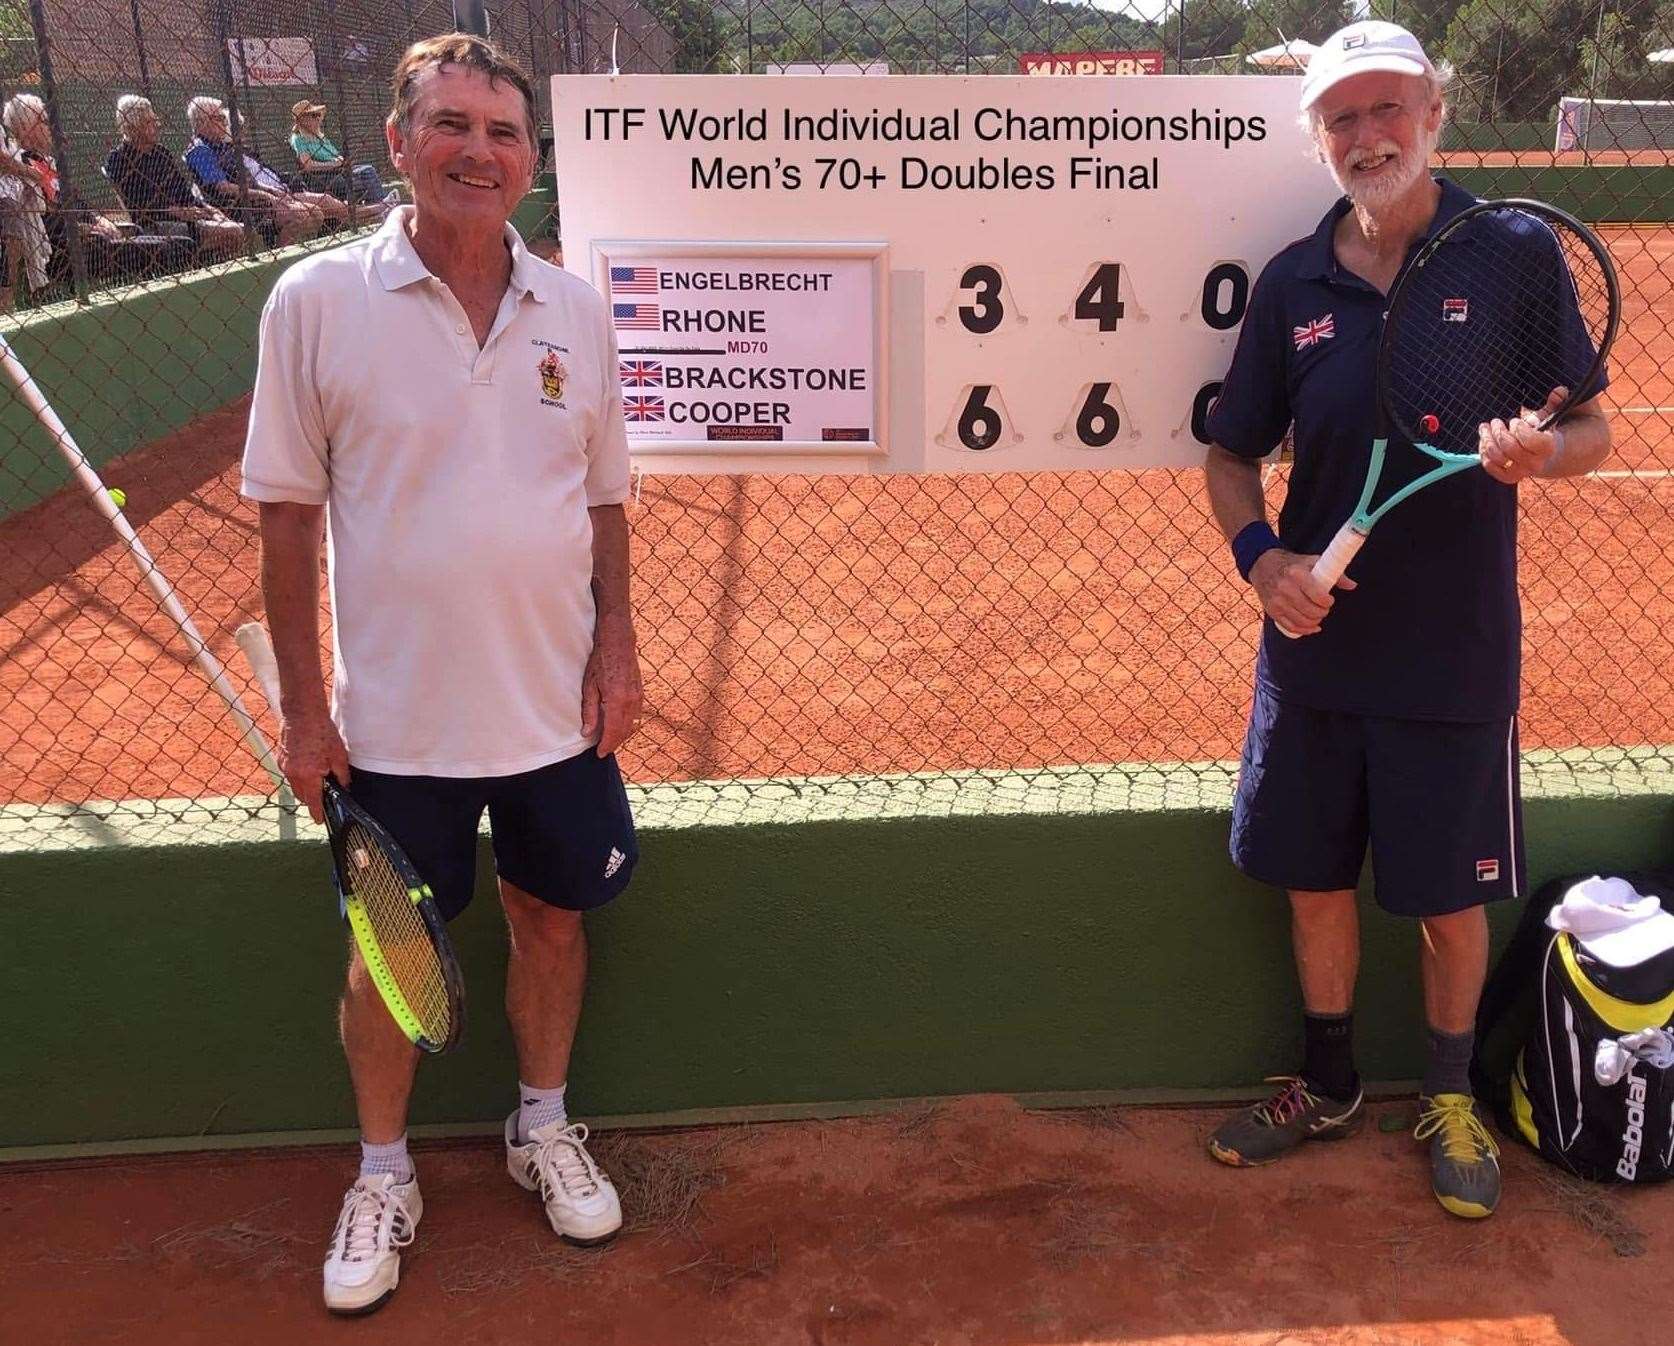 Jasper Cooper, right, celebrates with playing partner Boyd Brackstone after their doubles over-70s Final success at this year's World Tennis Championships in Mallorca